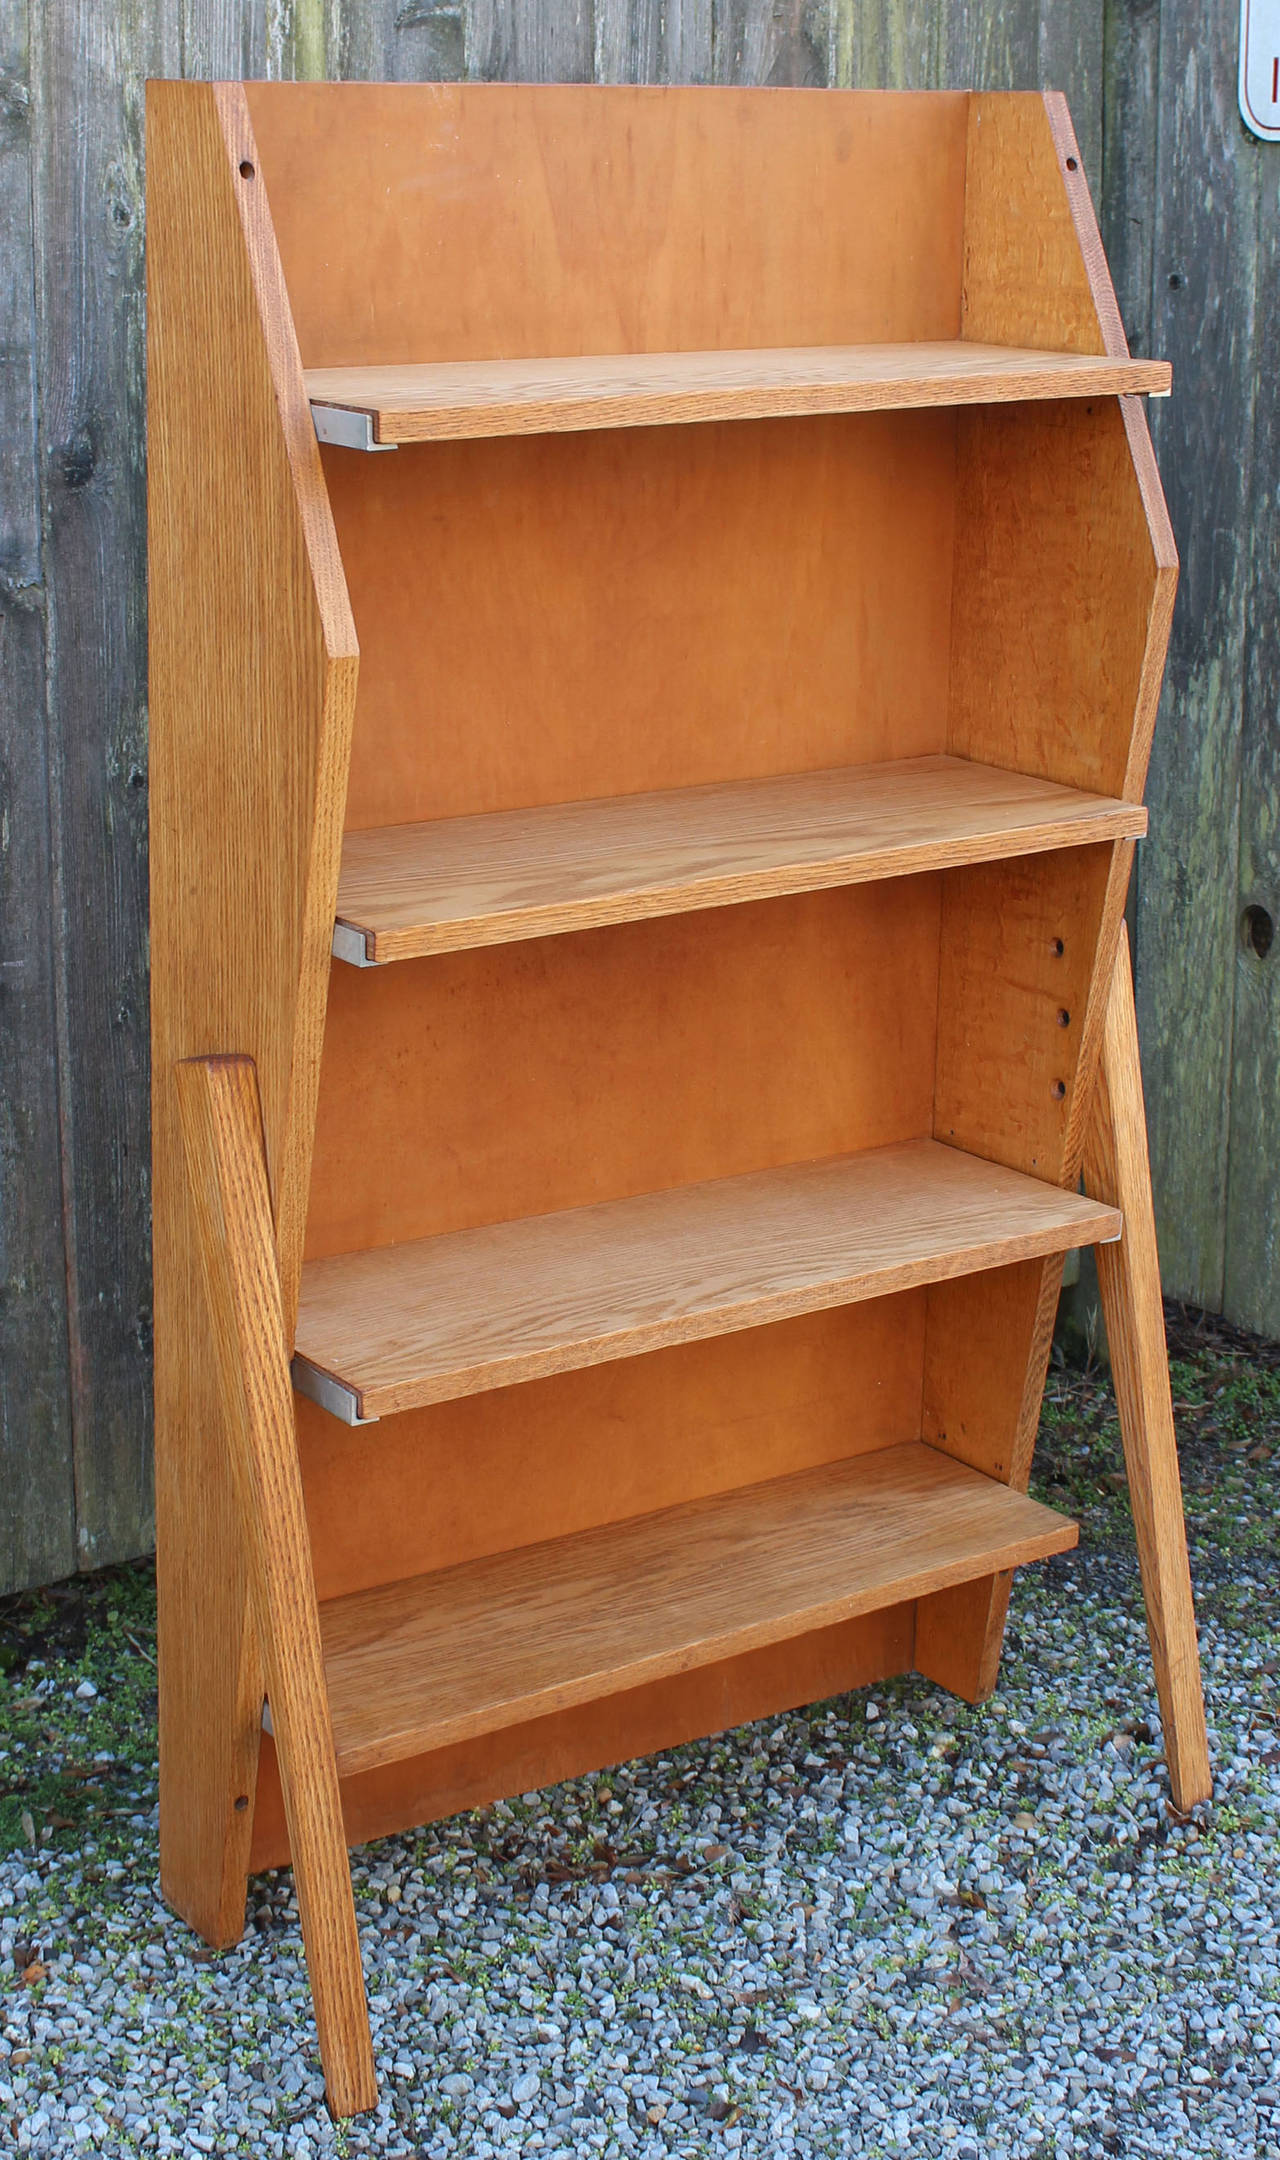 A French industrial modern style oak book shelf with extended support legs and steel details, in the manner of